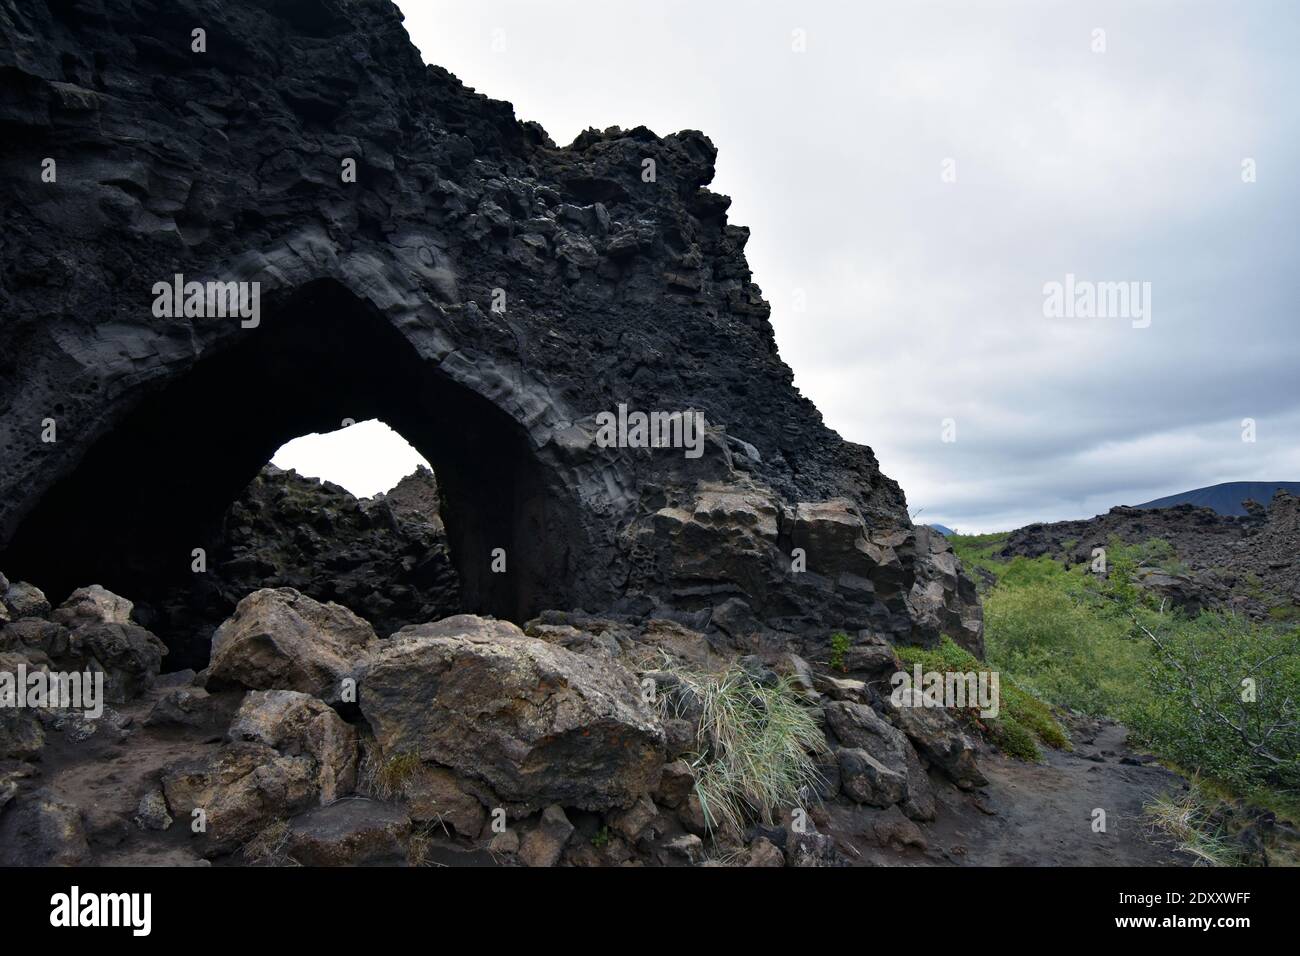 Kirkjan (the Church) a lava tube structure at Dimmuborgir in Lake Myvatn, Northern Iceland. Lava rock with a hole through the middle. Stock Photo